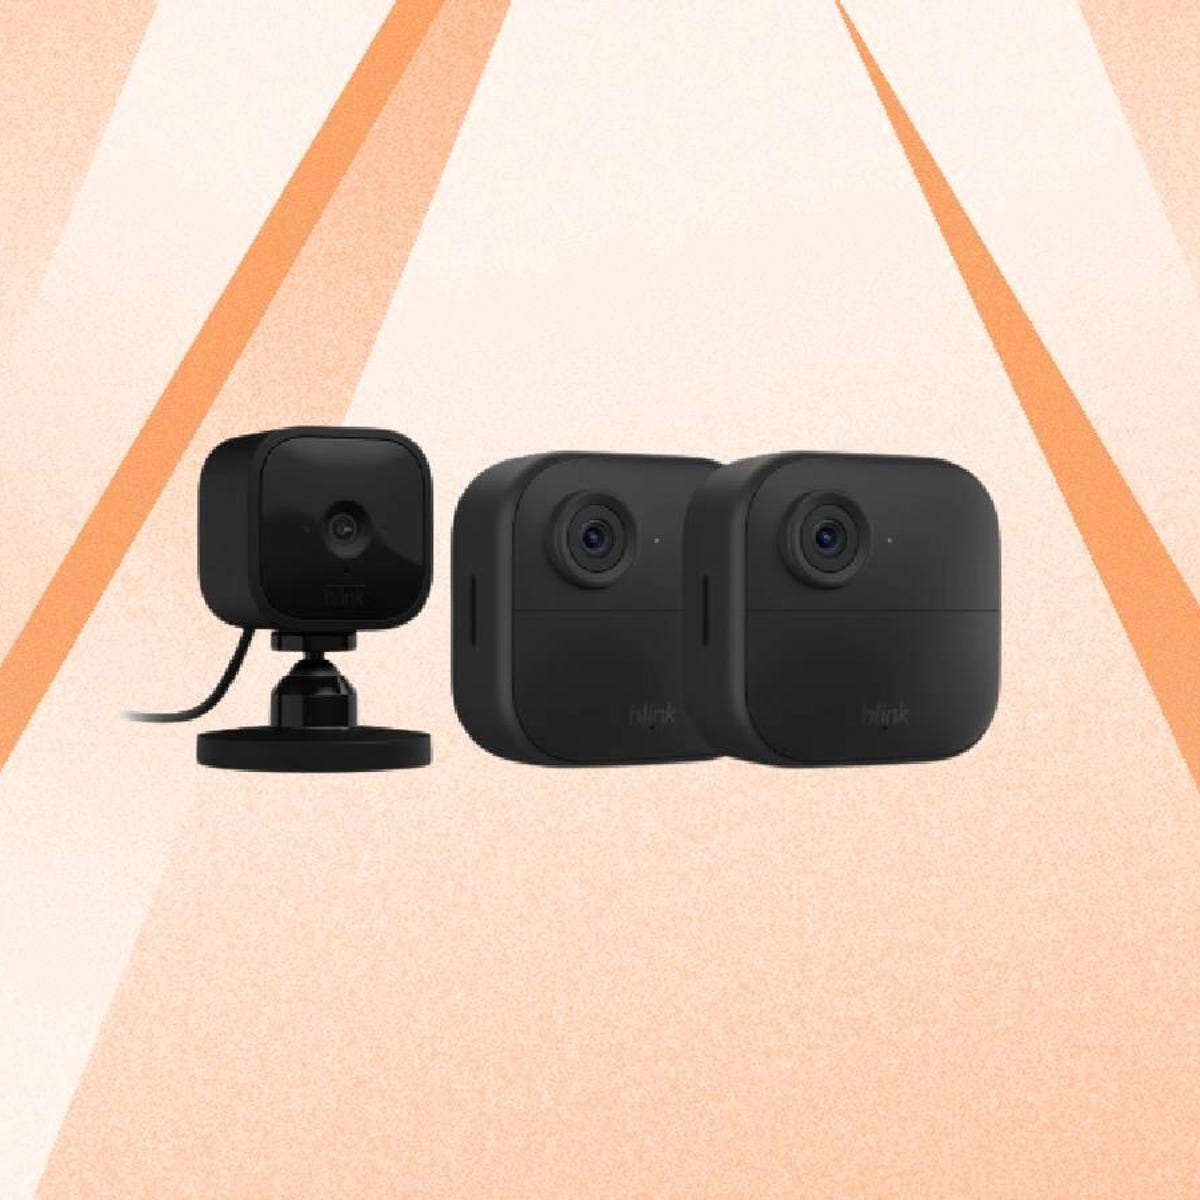 home security sale: Save up to 50% on Blink cameras ahead of fall  Prime Day